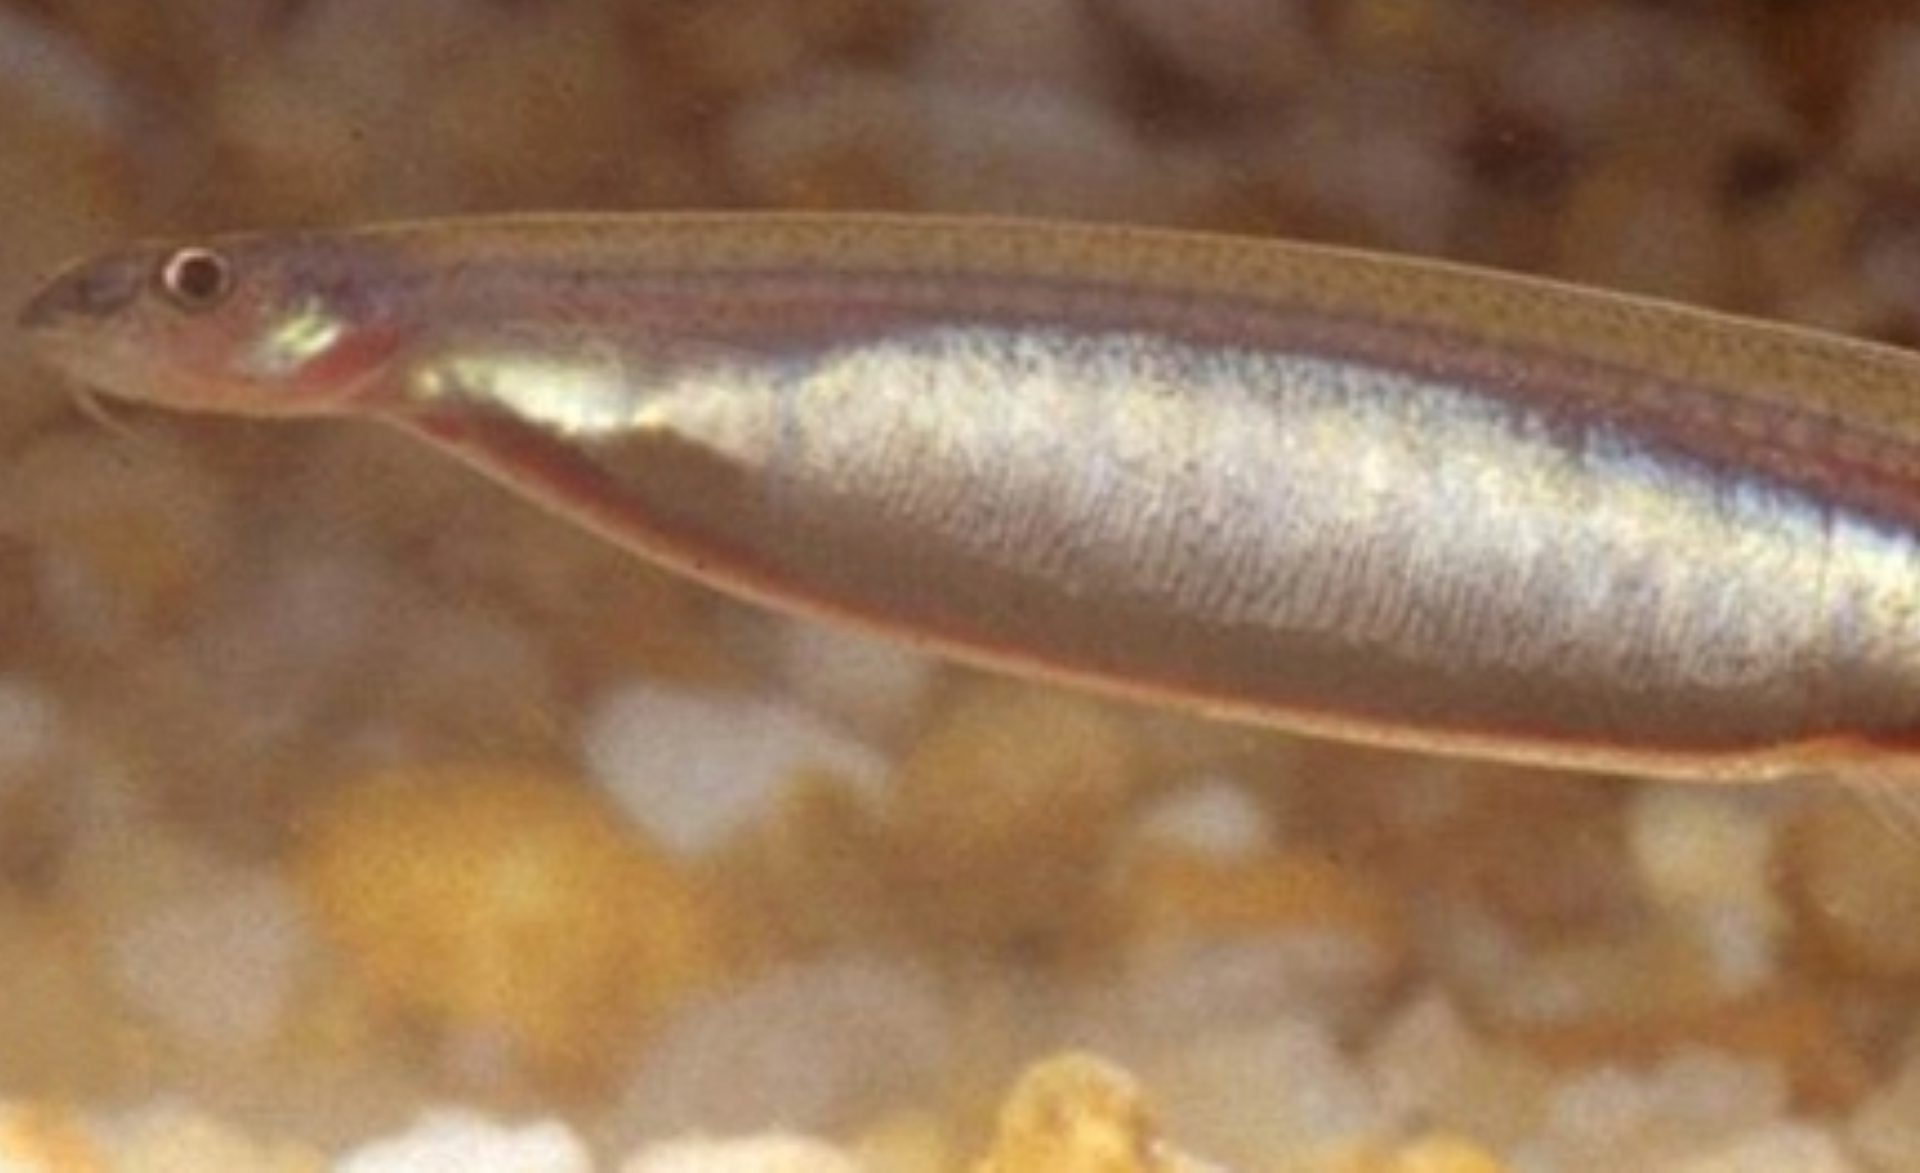 Candiru: The parasitic fish that might swim up your privates